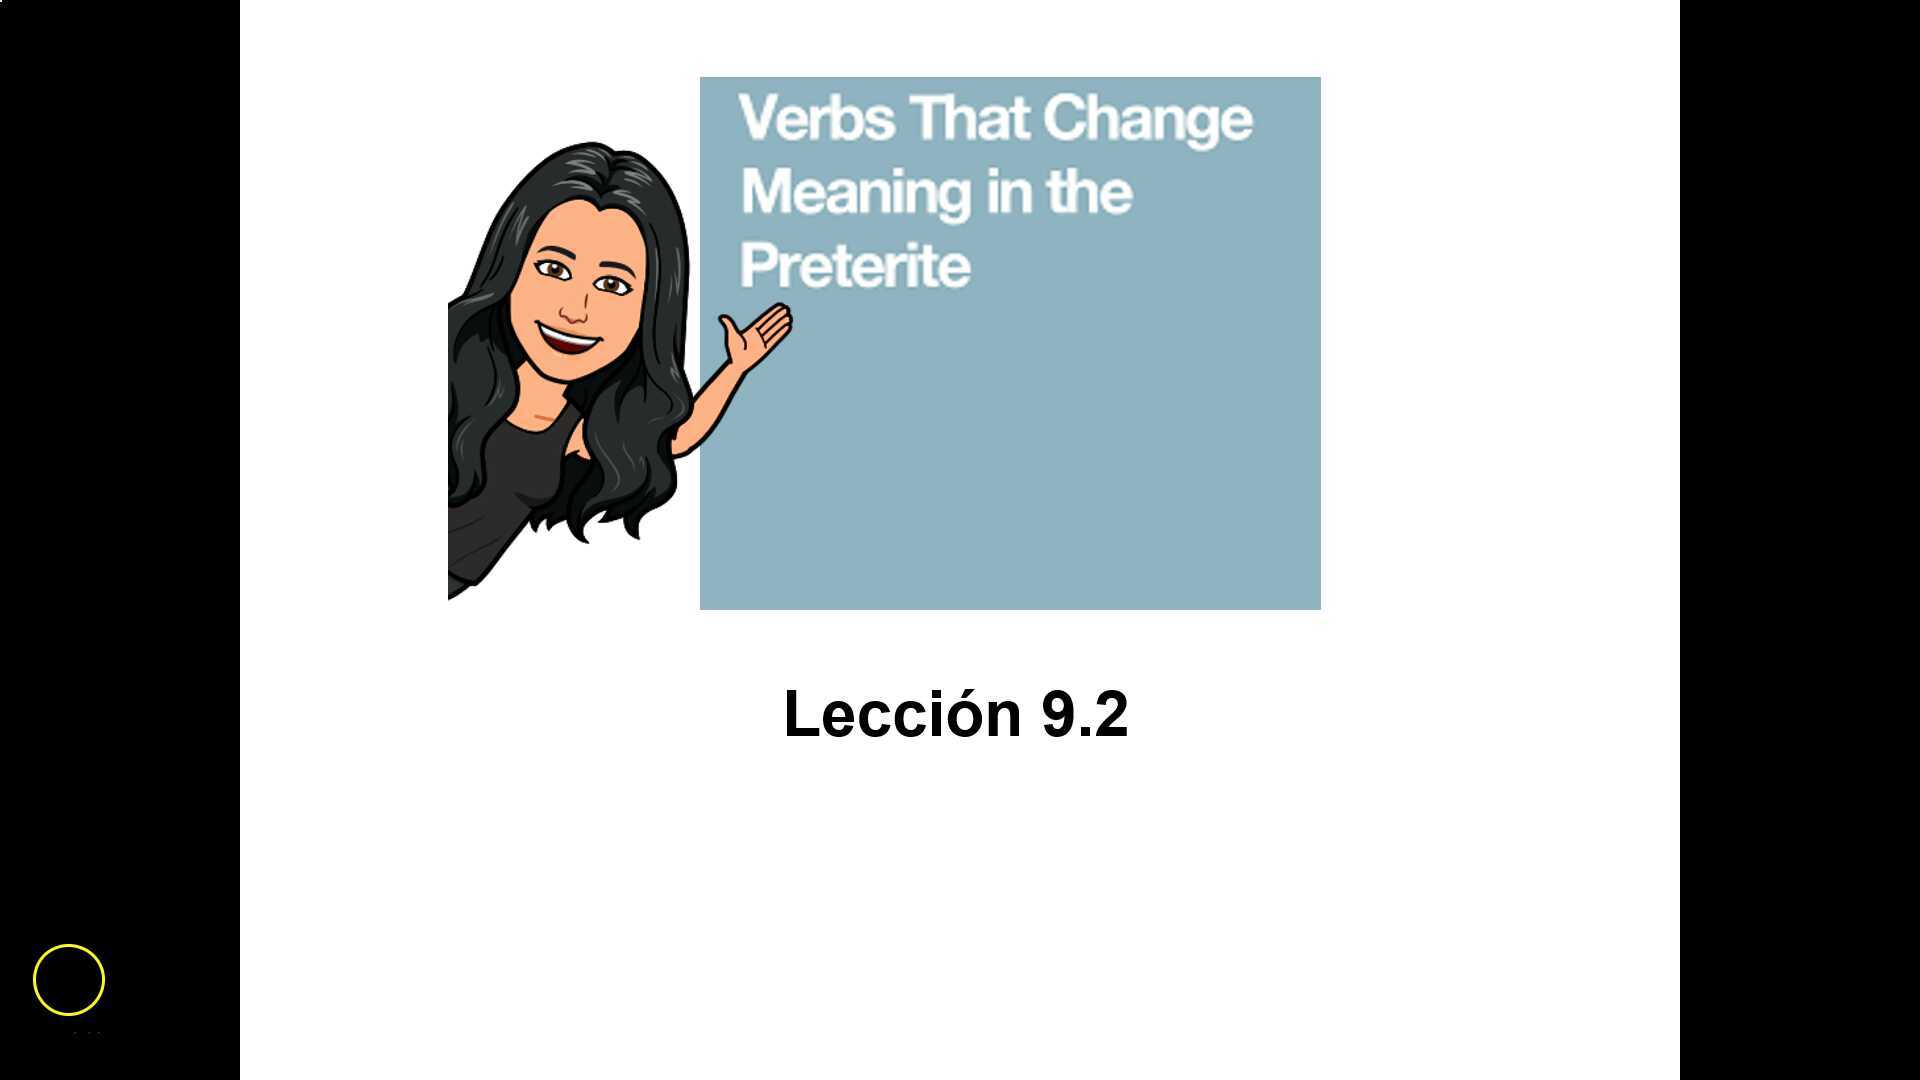 lecci-n-9-2-verbs-that-change-meaning-in-the-preterite